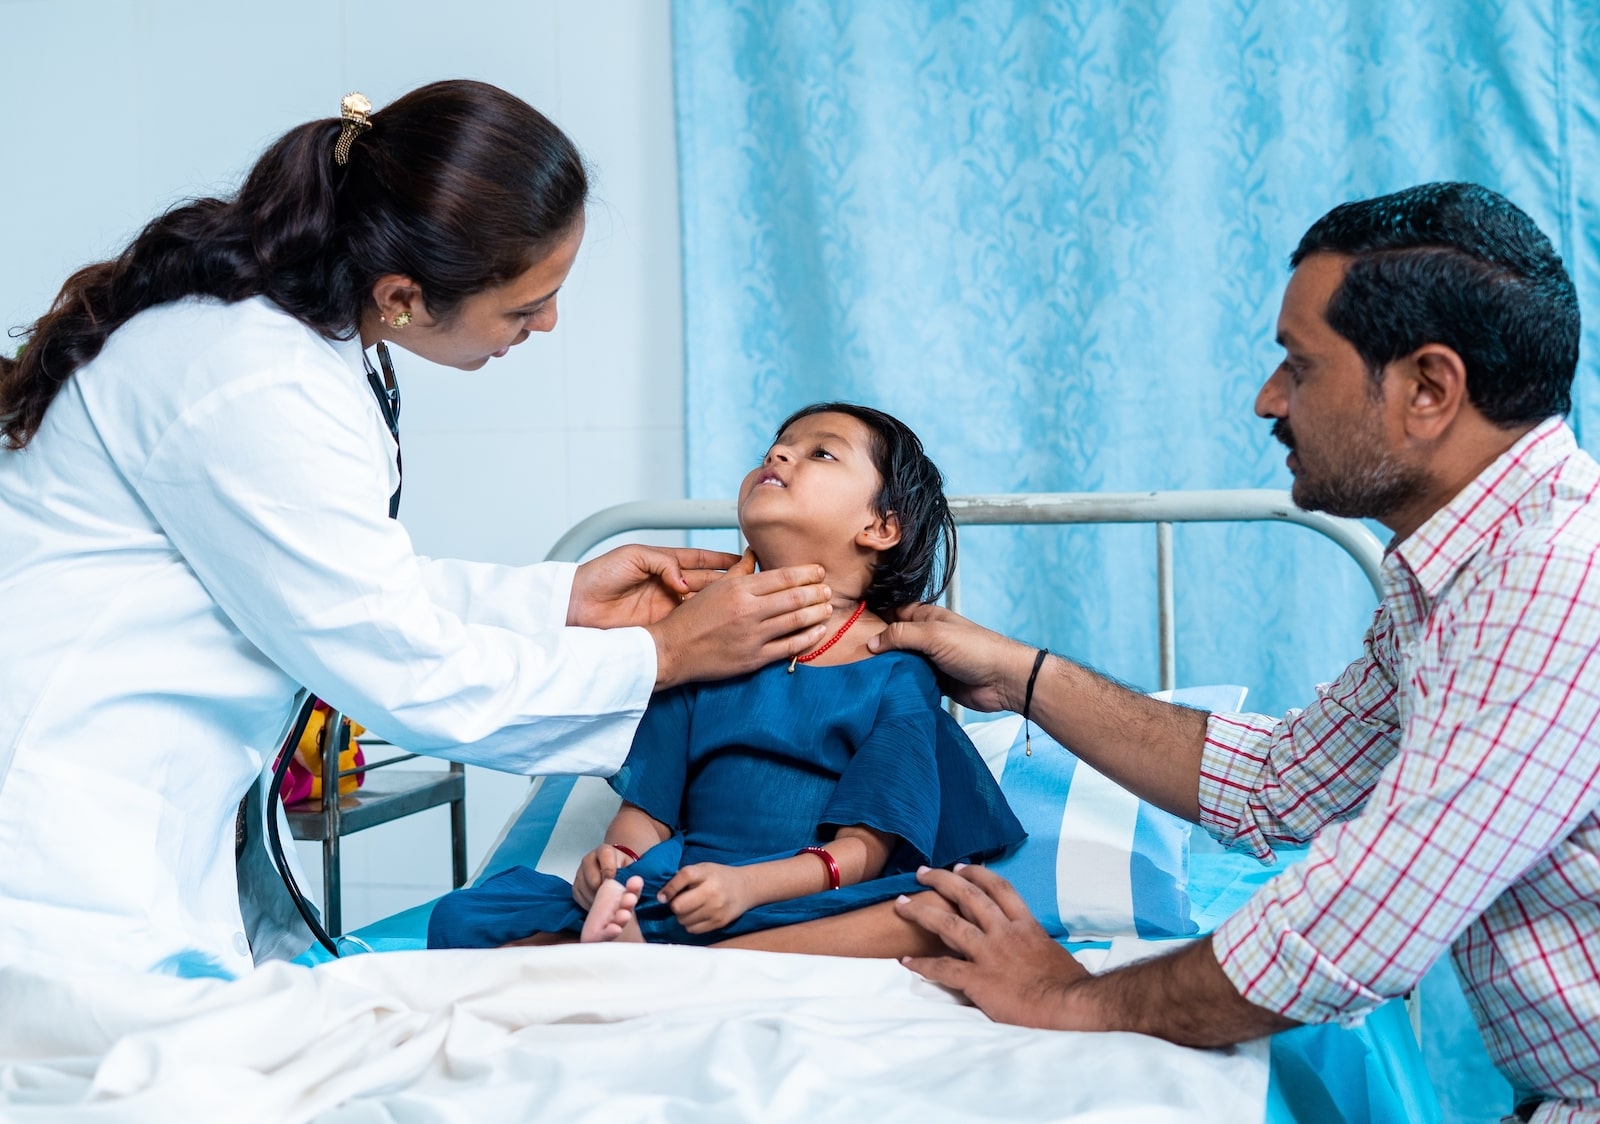 a doctor examines the throat of a young child who is with their father. the doctor is gently touching the child's throat near their jaw and ears, where mumps typically causes swelling